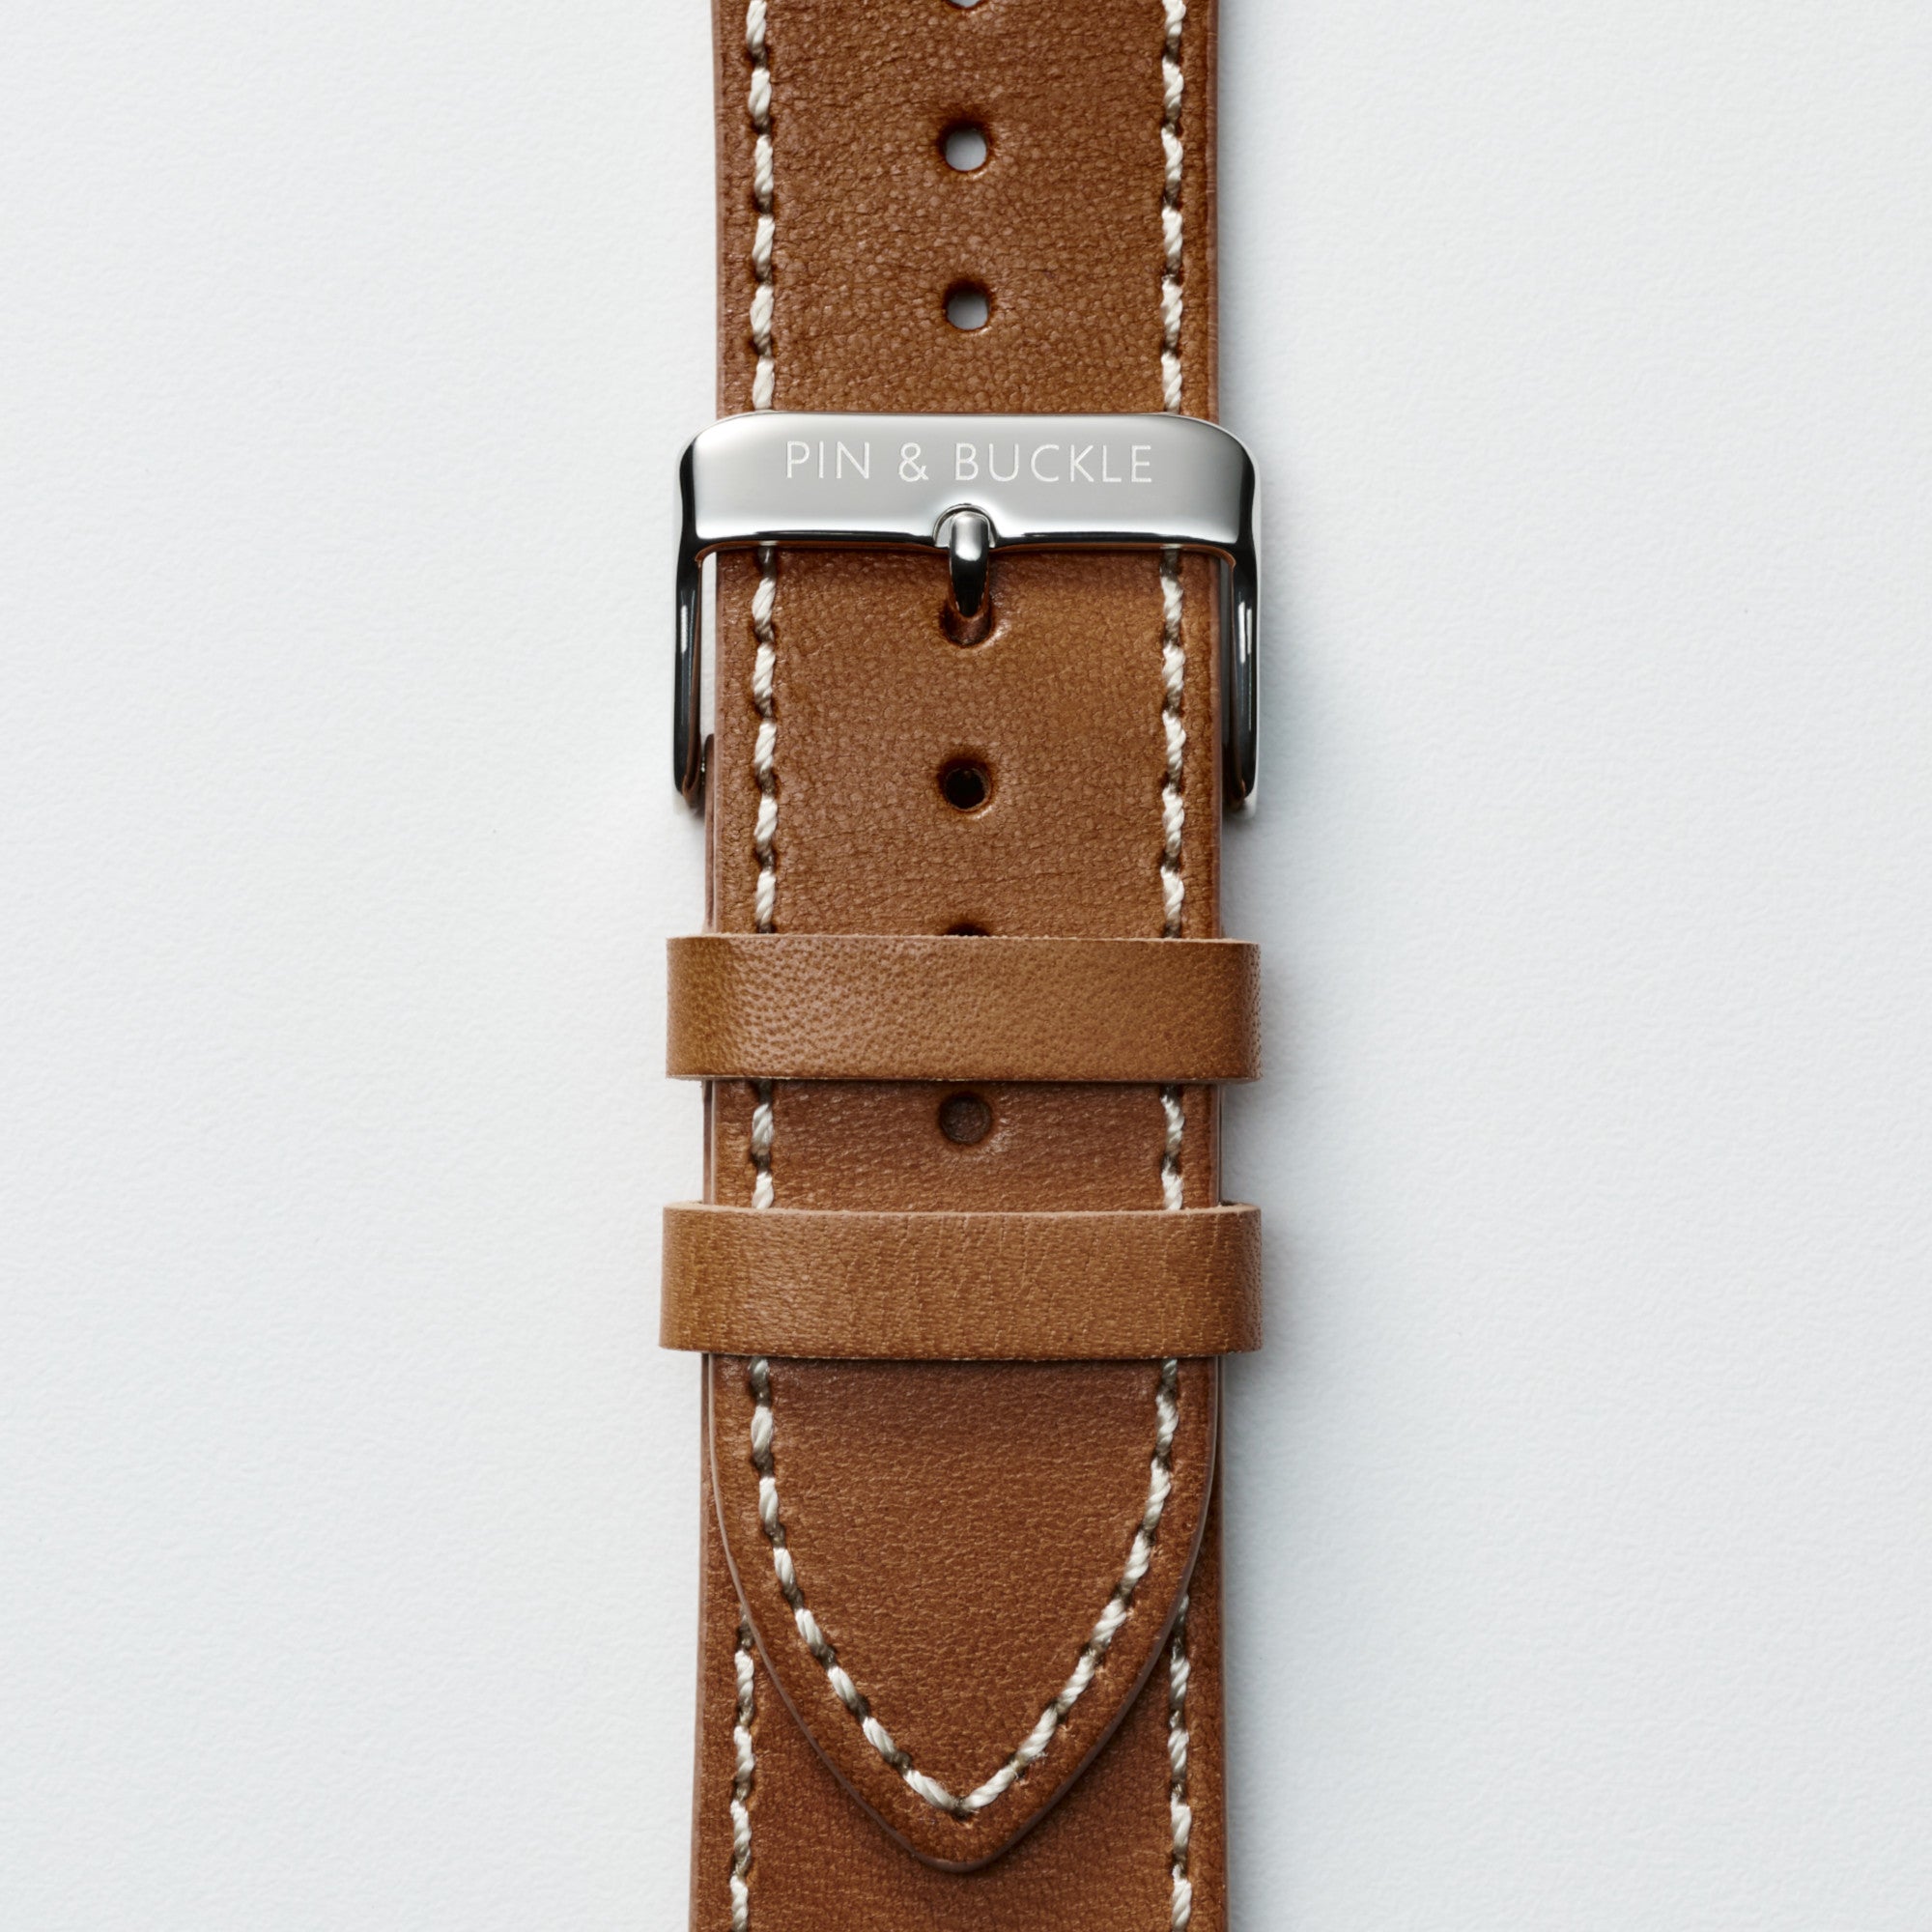 Vachetta Leather Apple Watch Band by Pin & Buckle - Patina Day 90